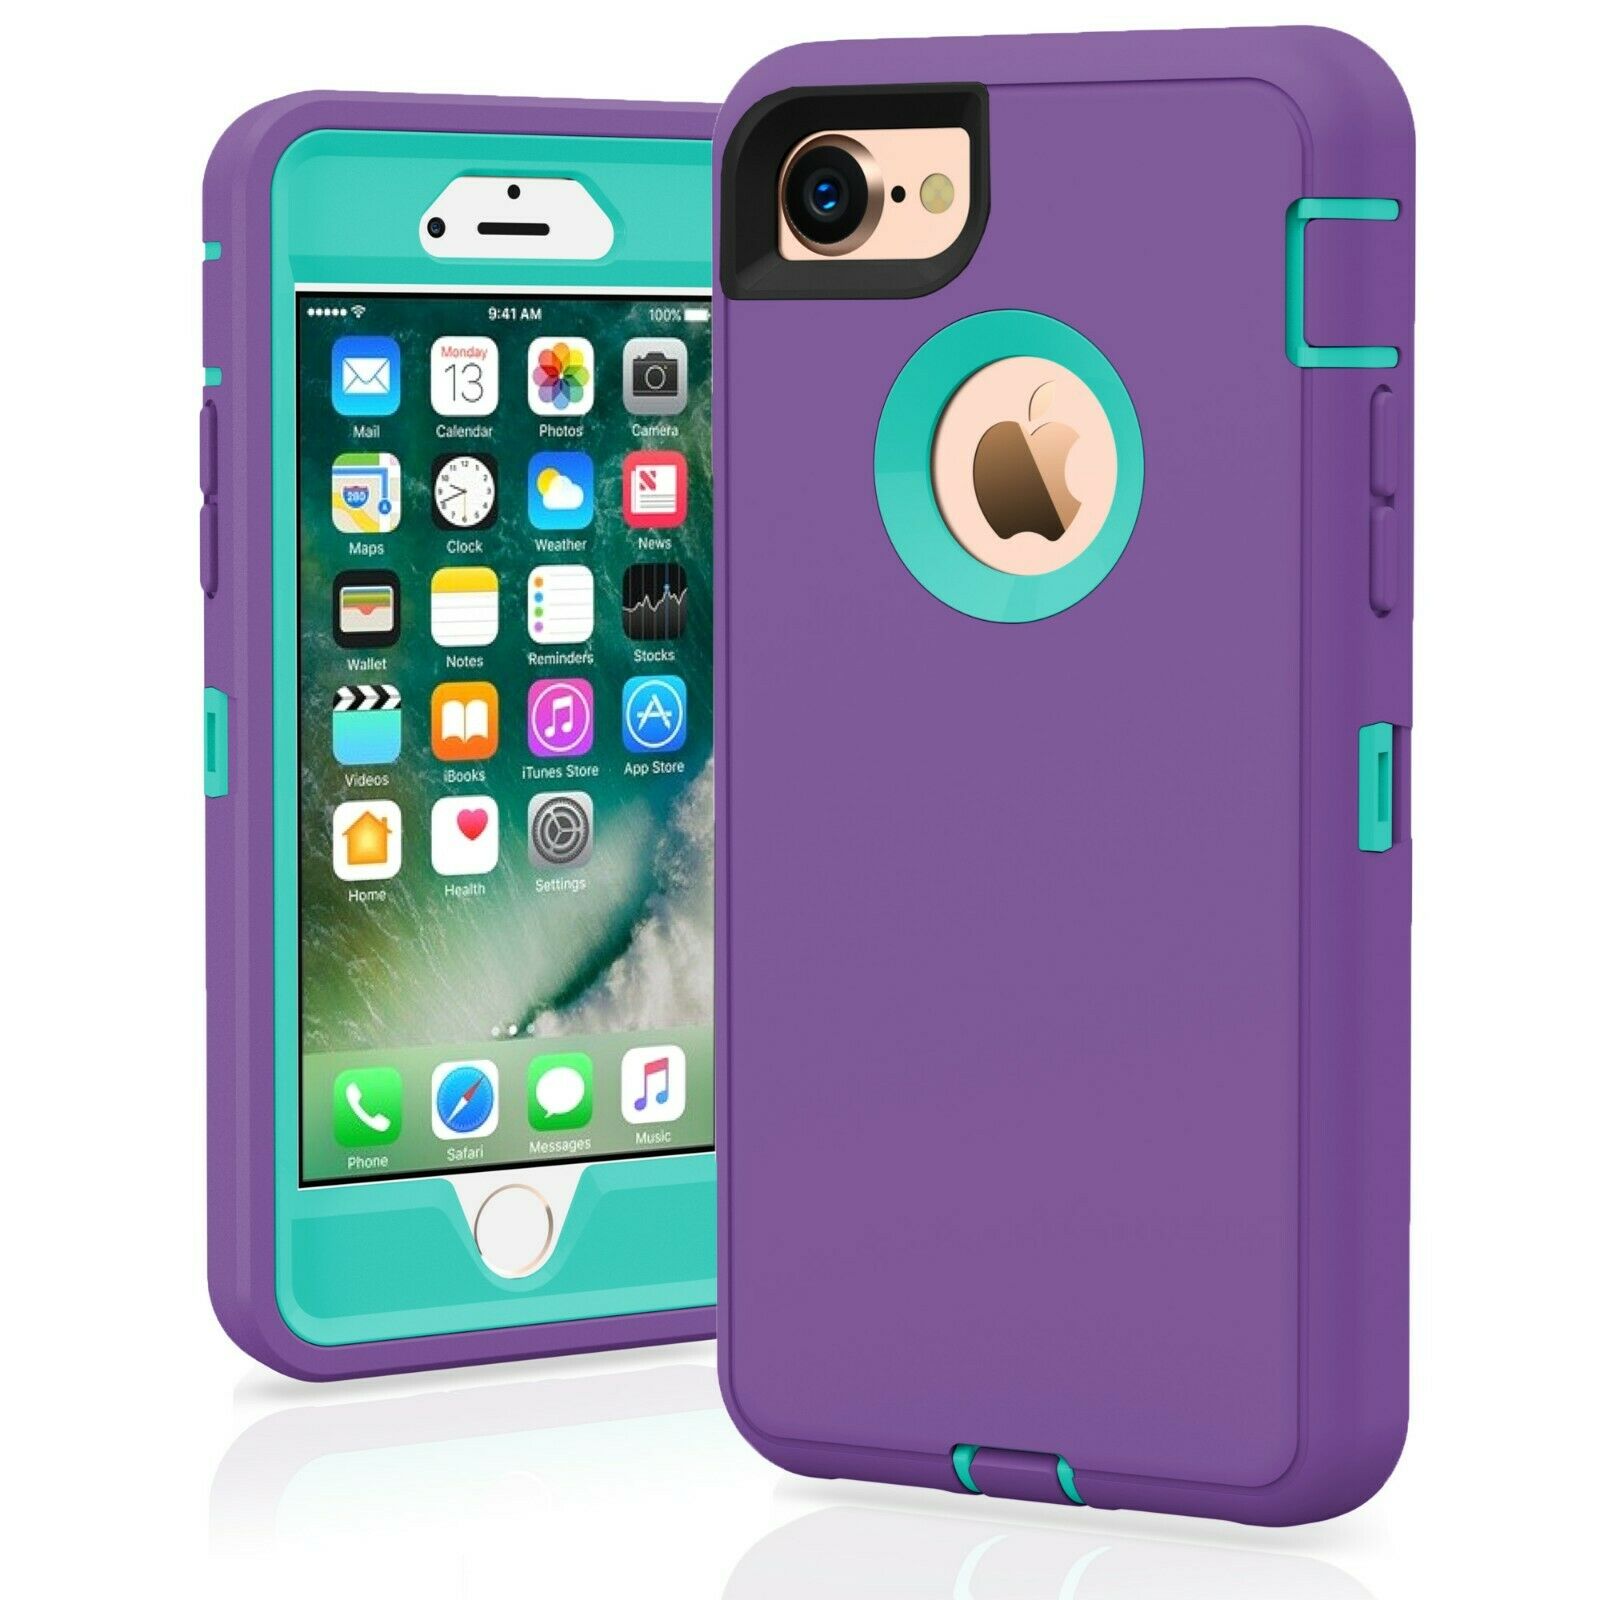 For iPhone 7 / 7 Plus 8 / 8 Plus Case Cover Protective Hybrid Rugged Shockproof alphaaccessmobile For iPhone 7 PURPLE TEAL 